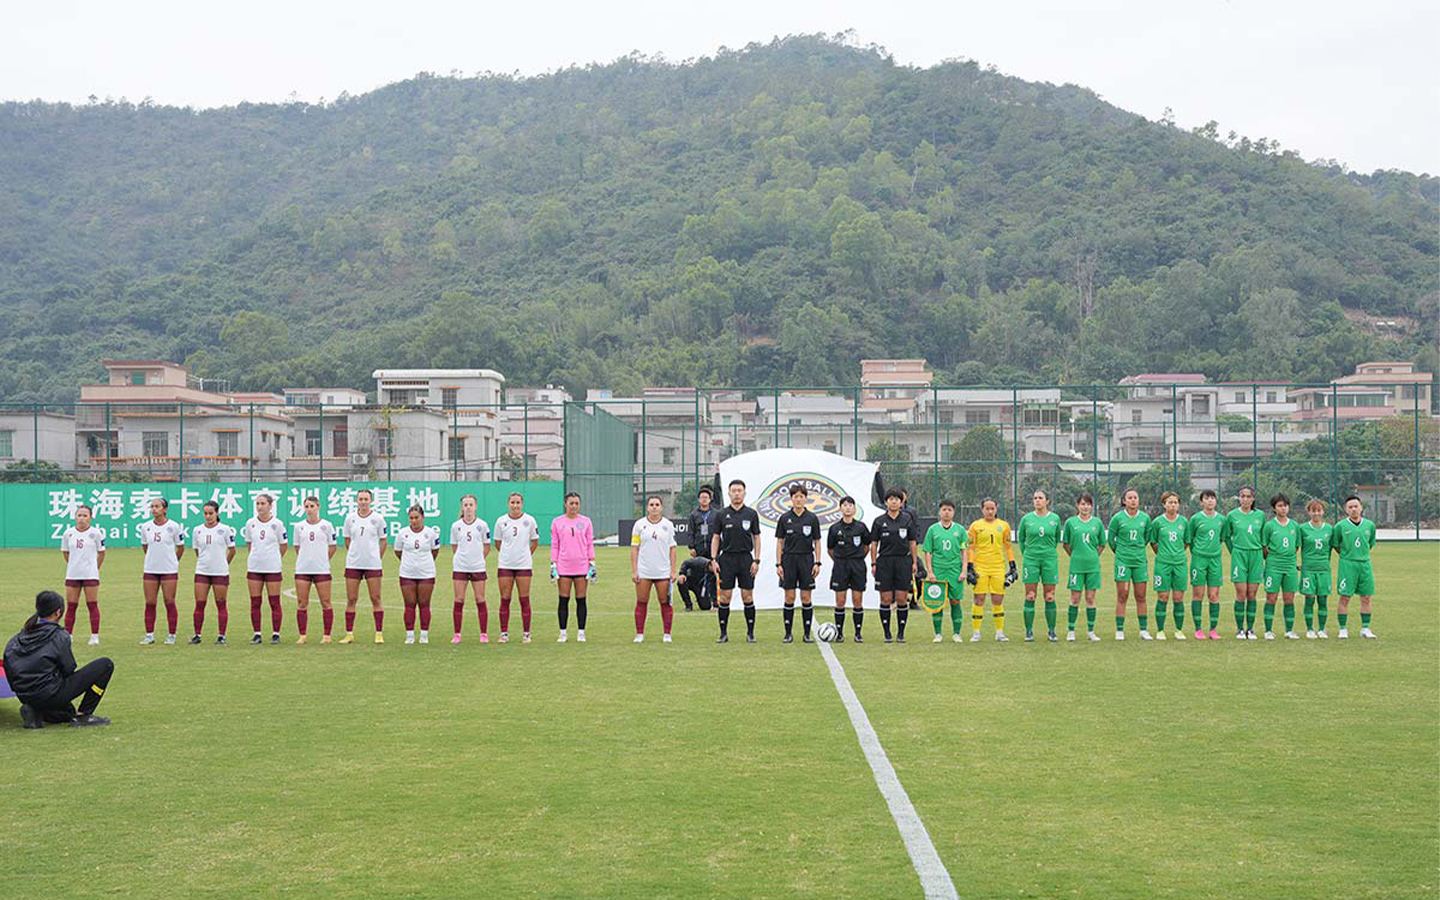 The Macao and Guam women's football team lined up before the match